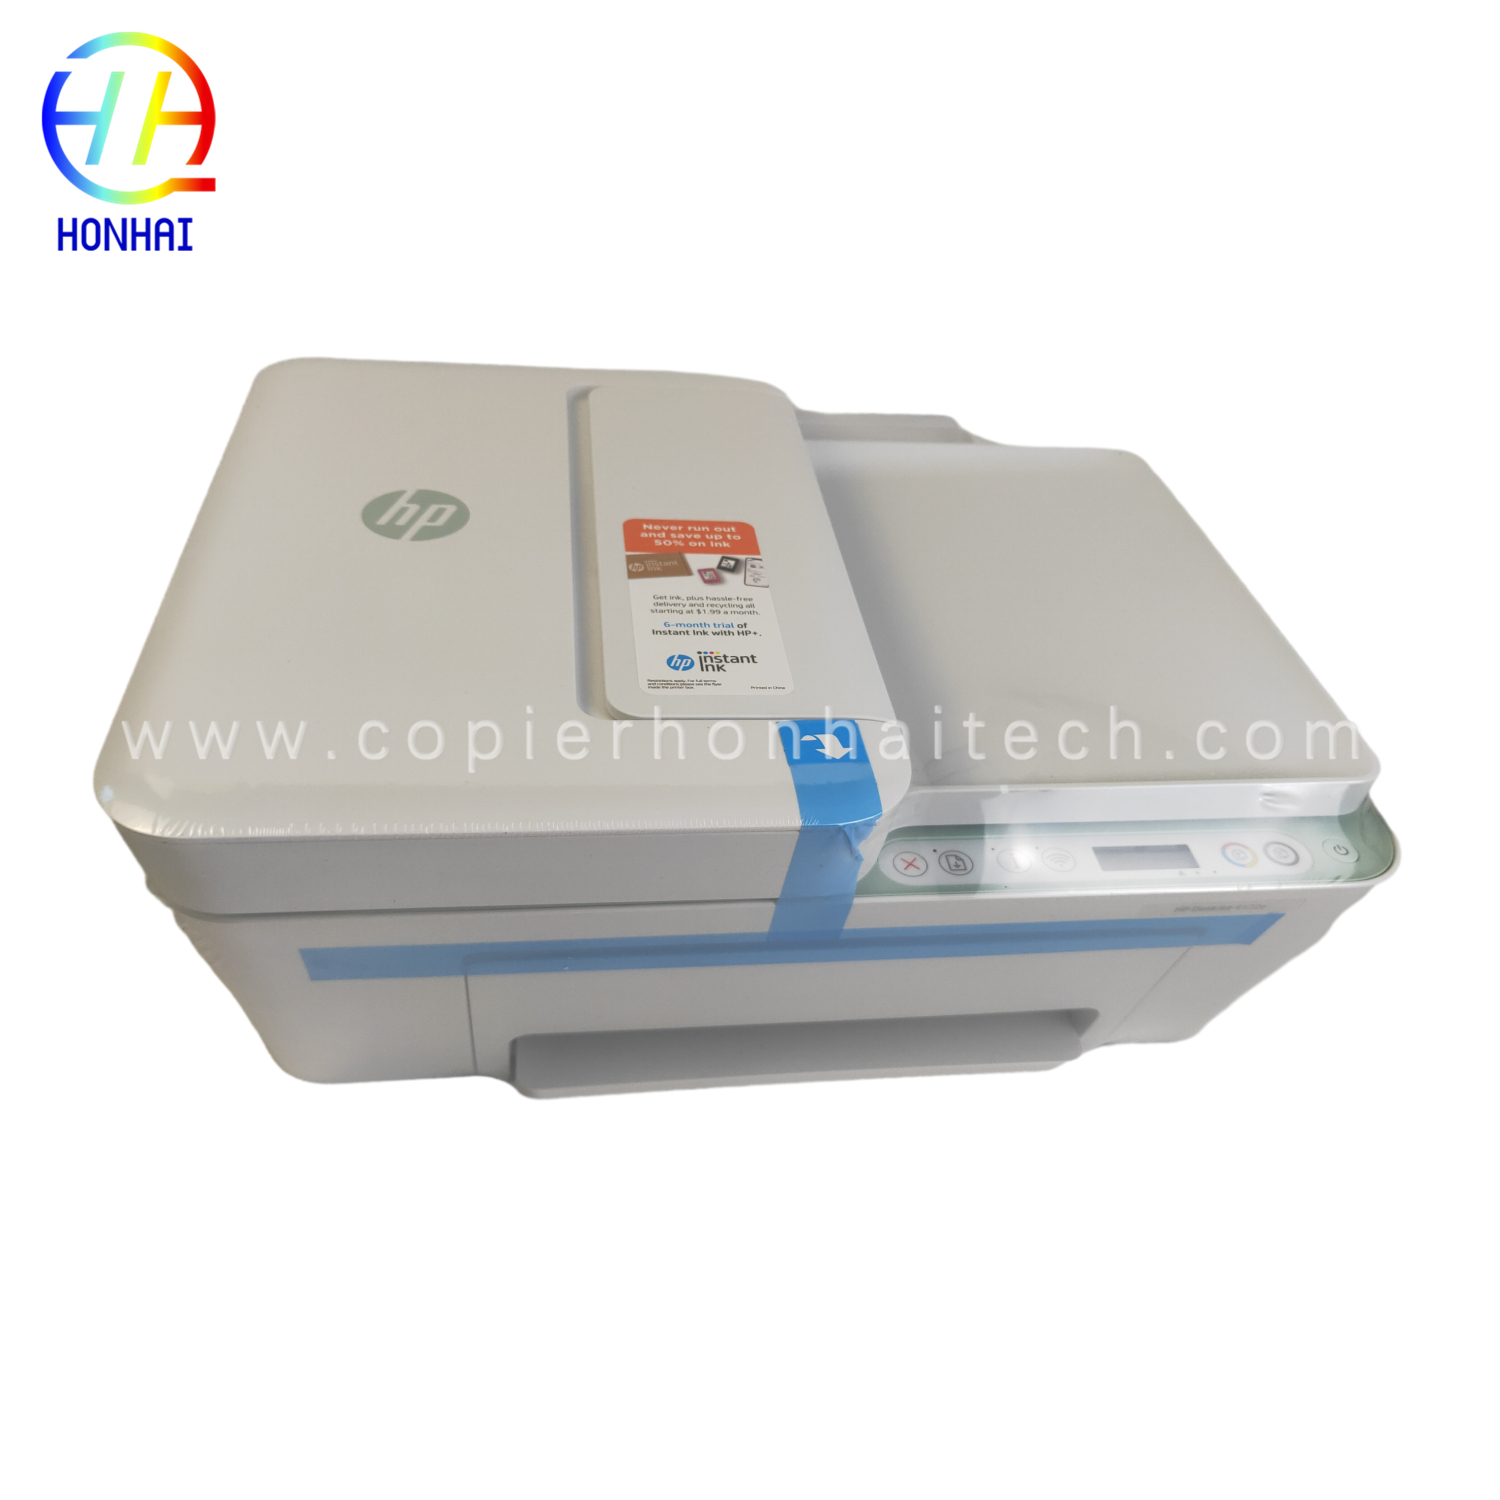 https://www.copierhonhaitech.com/original-new-wireless-printer-for-hp-deskjet-4122e-all-in-one-printer-scan-and-copy-home-office-students-and-home- பிரிண்டர்-26q96a-தயாரிப்பு/